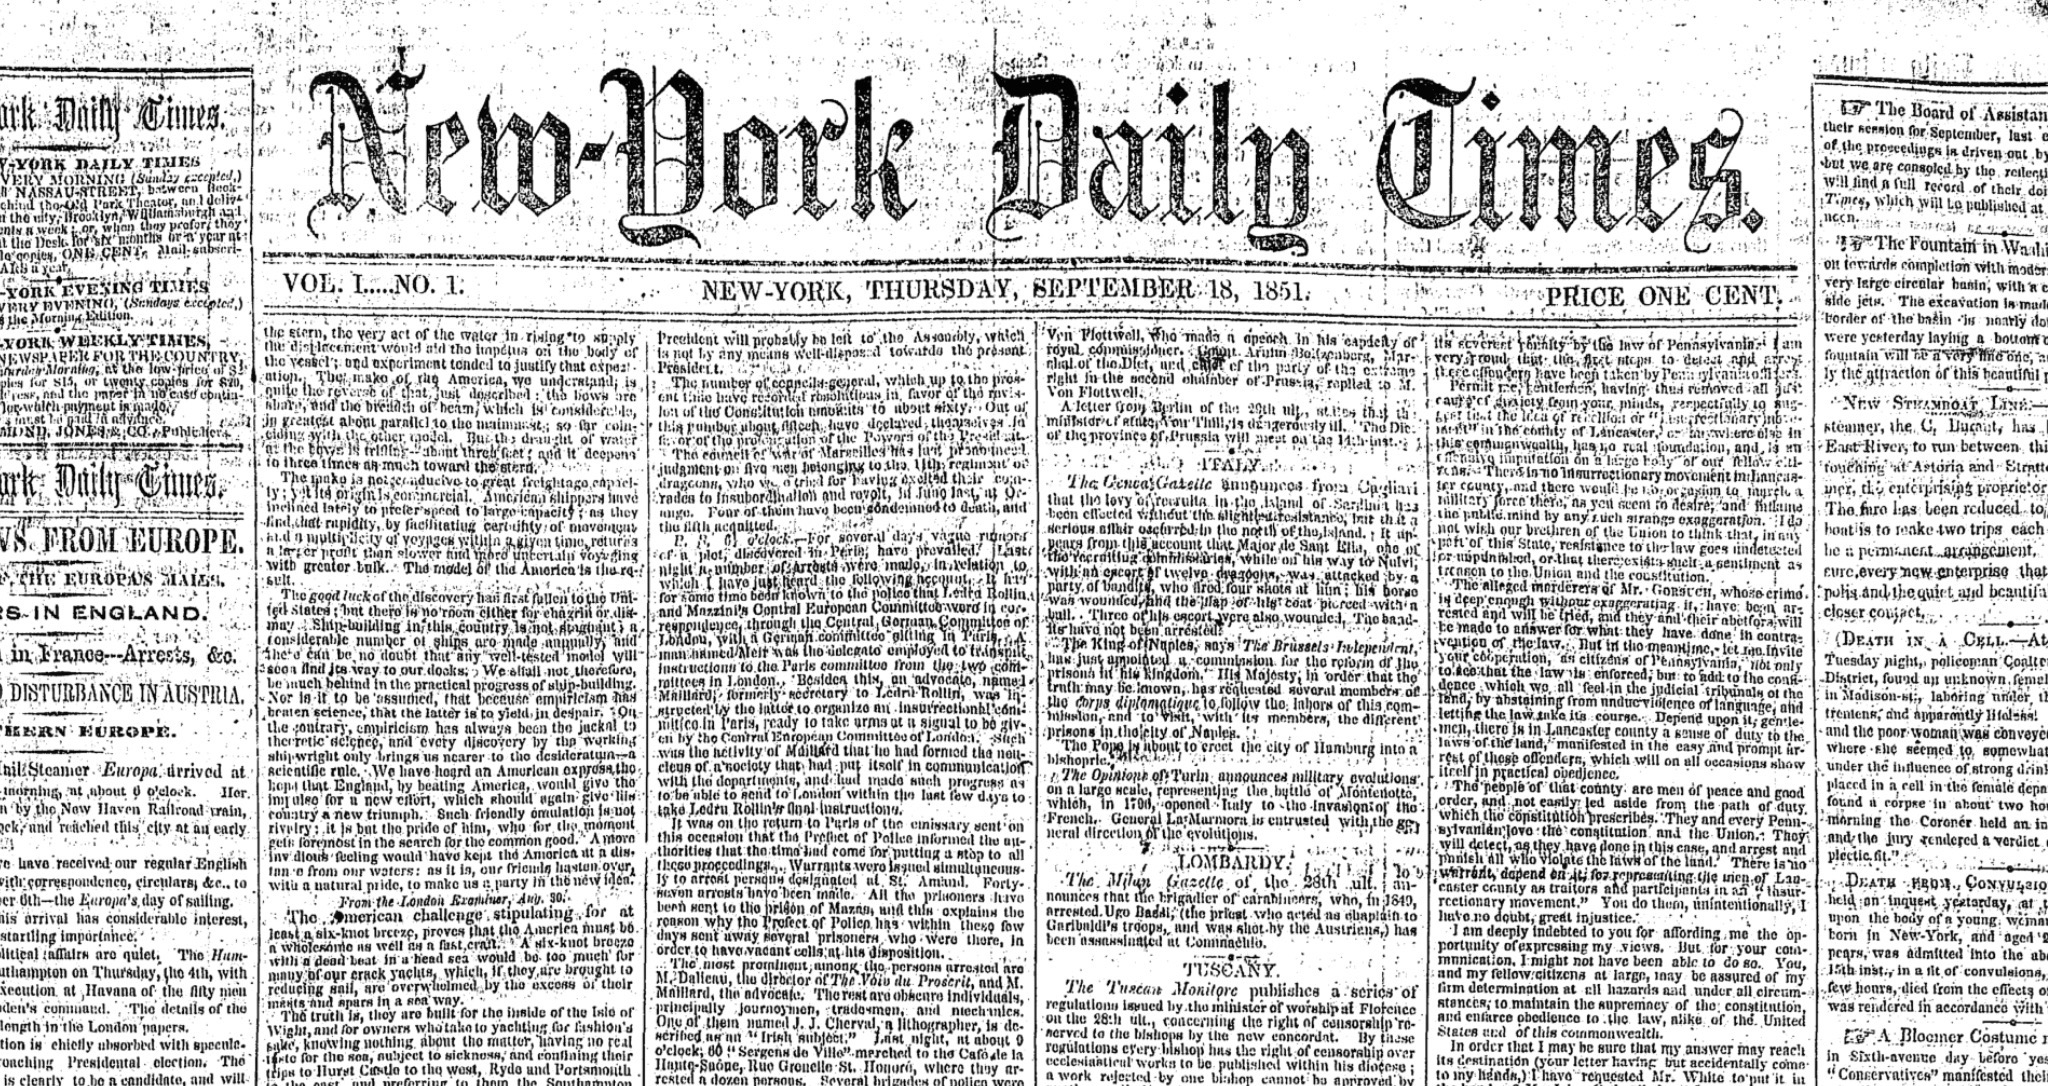 Front Page of the First Edition of The New York Times